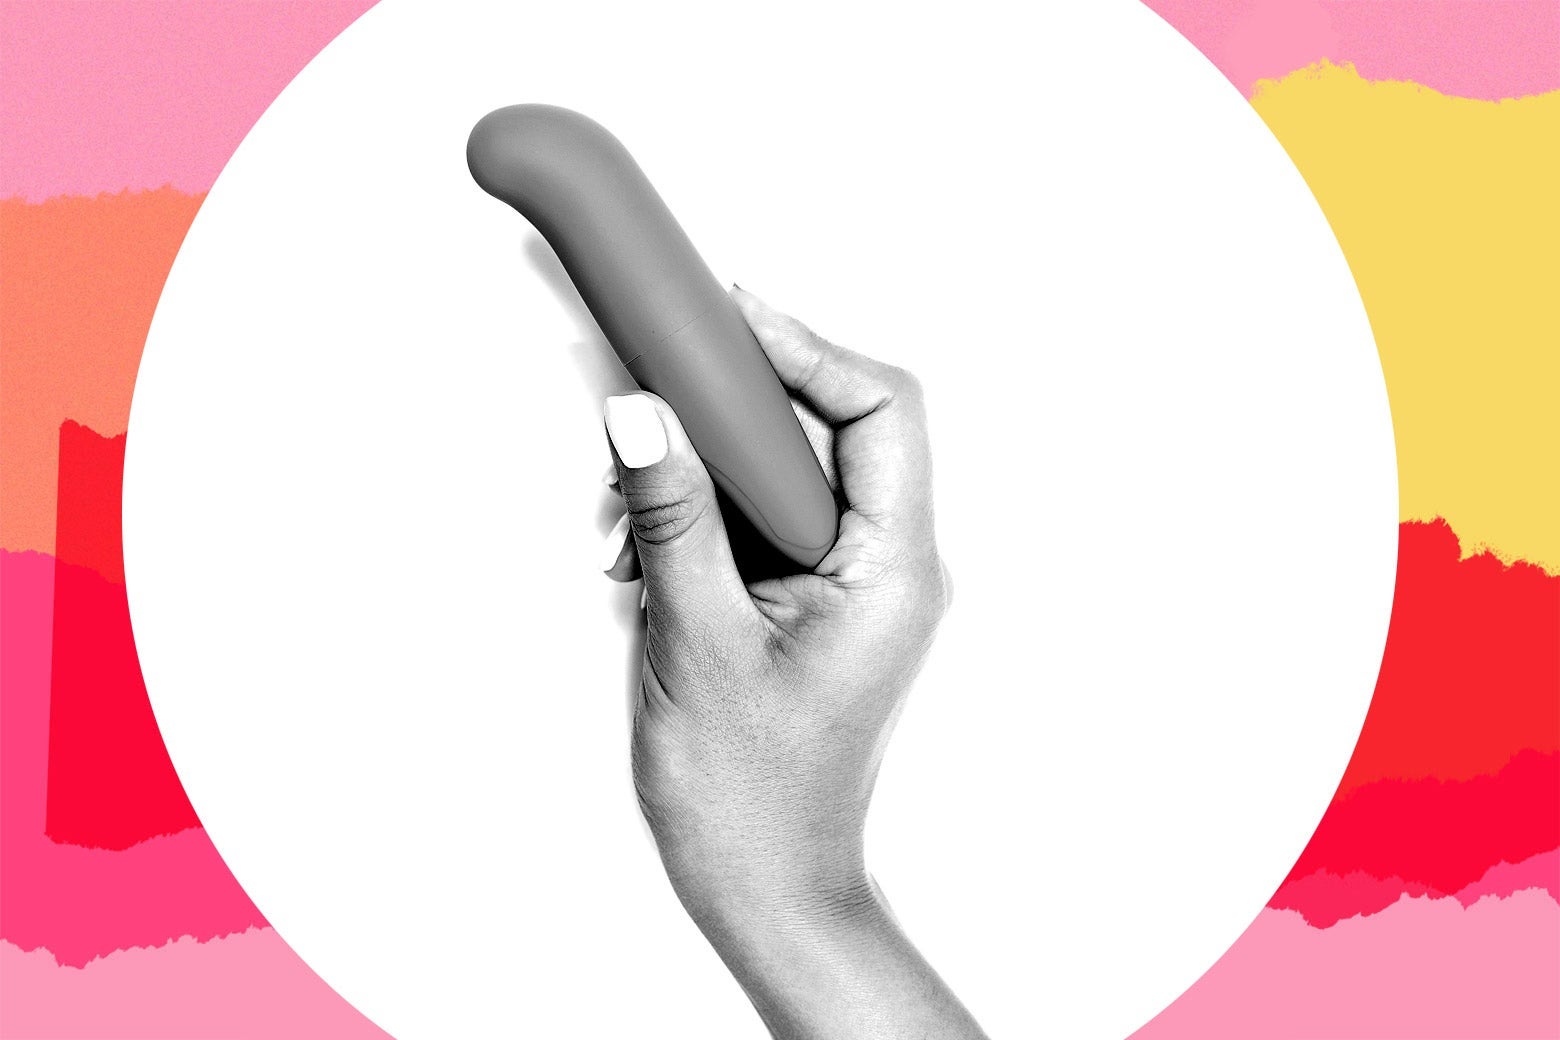 Buying vibrators for teens parenting advice from Care and Feeding. image